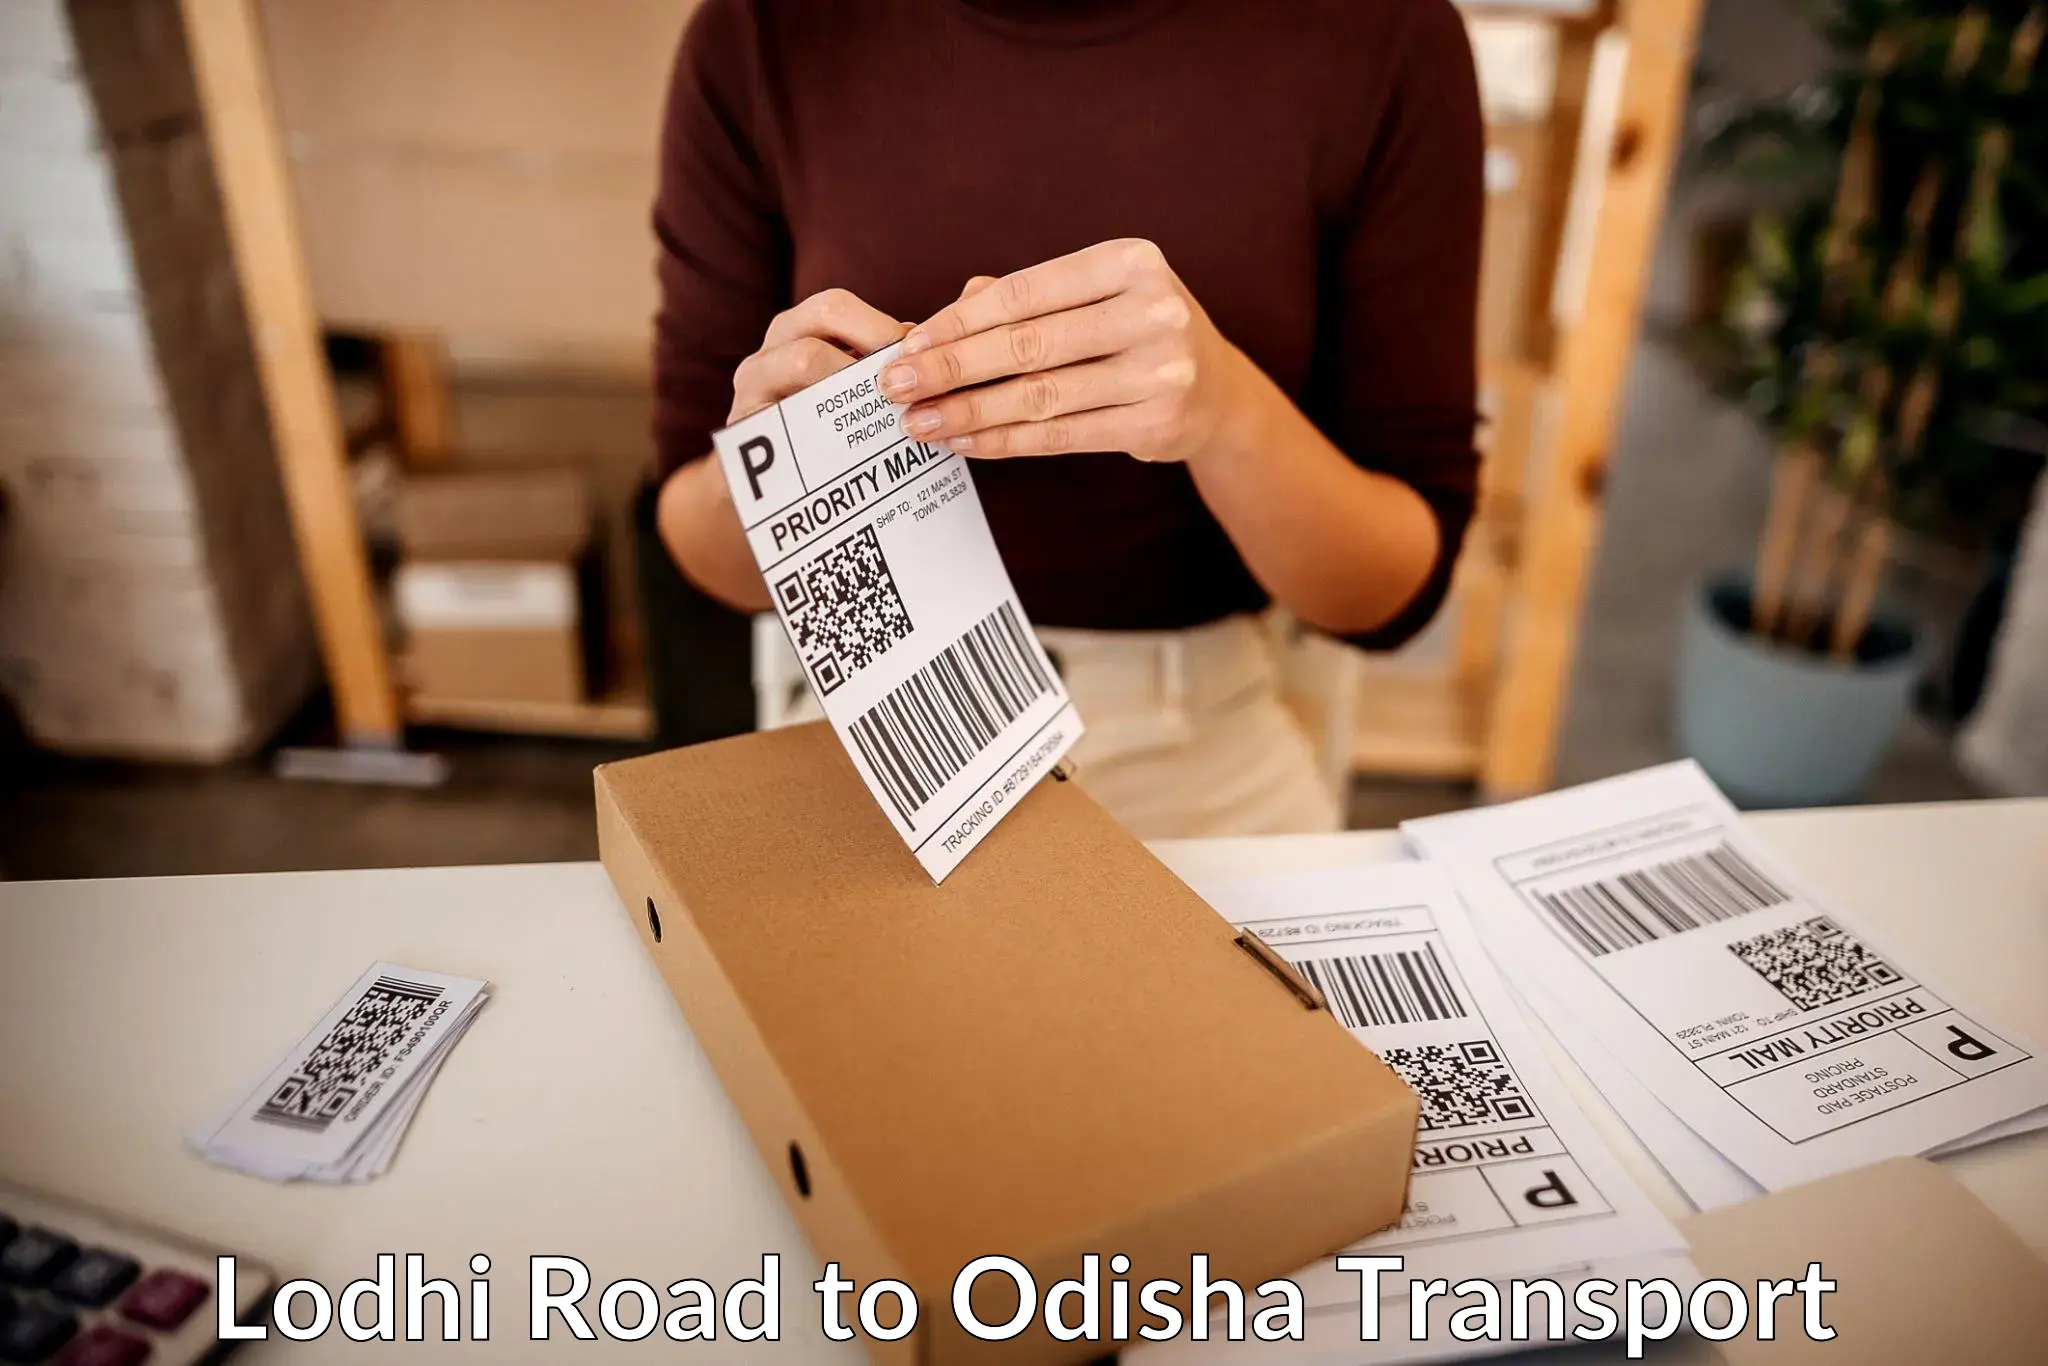 Daily parcel service transport Lodhi Road to Digapahandi